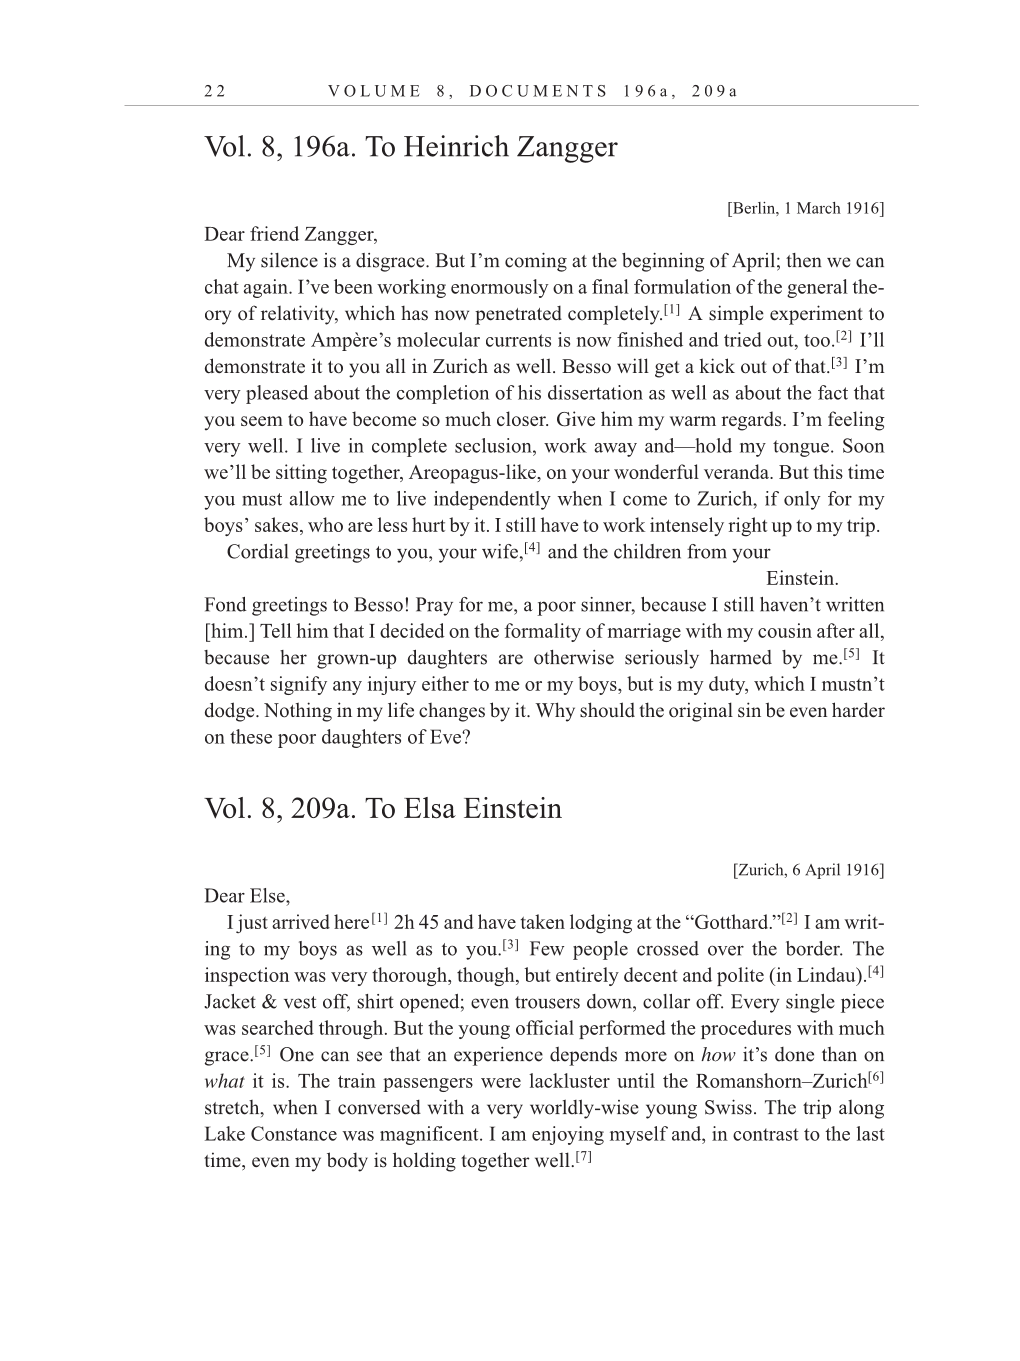 Volume 10: The Berlin Years: Correspondence, May-December 1920, and Supplementary Correspondence, 1909-1920 (English translation supplement) page 22